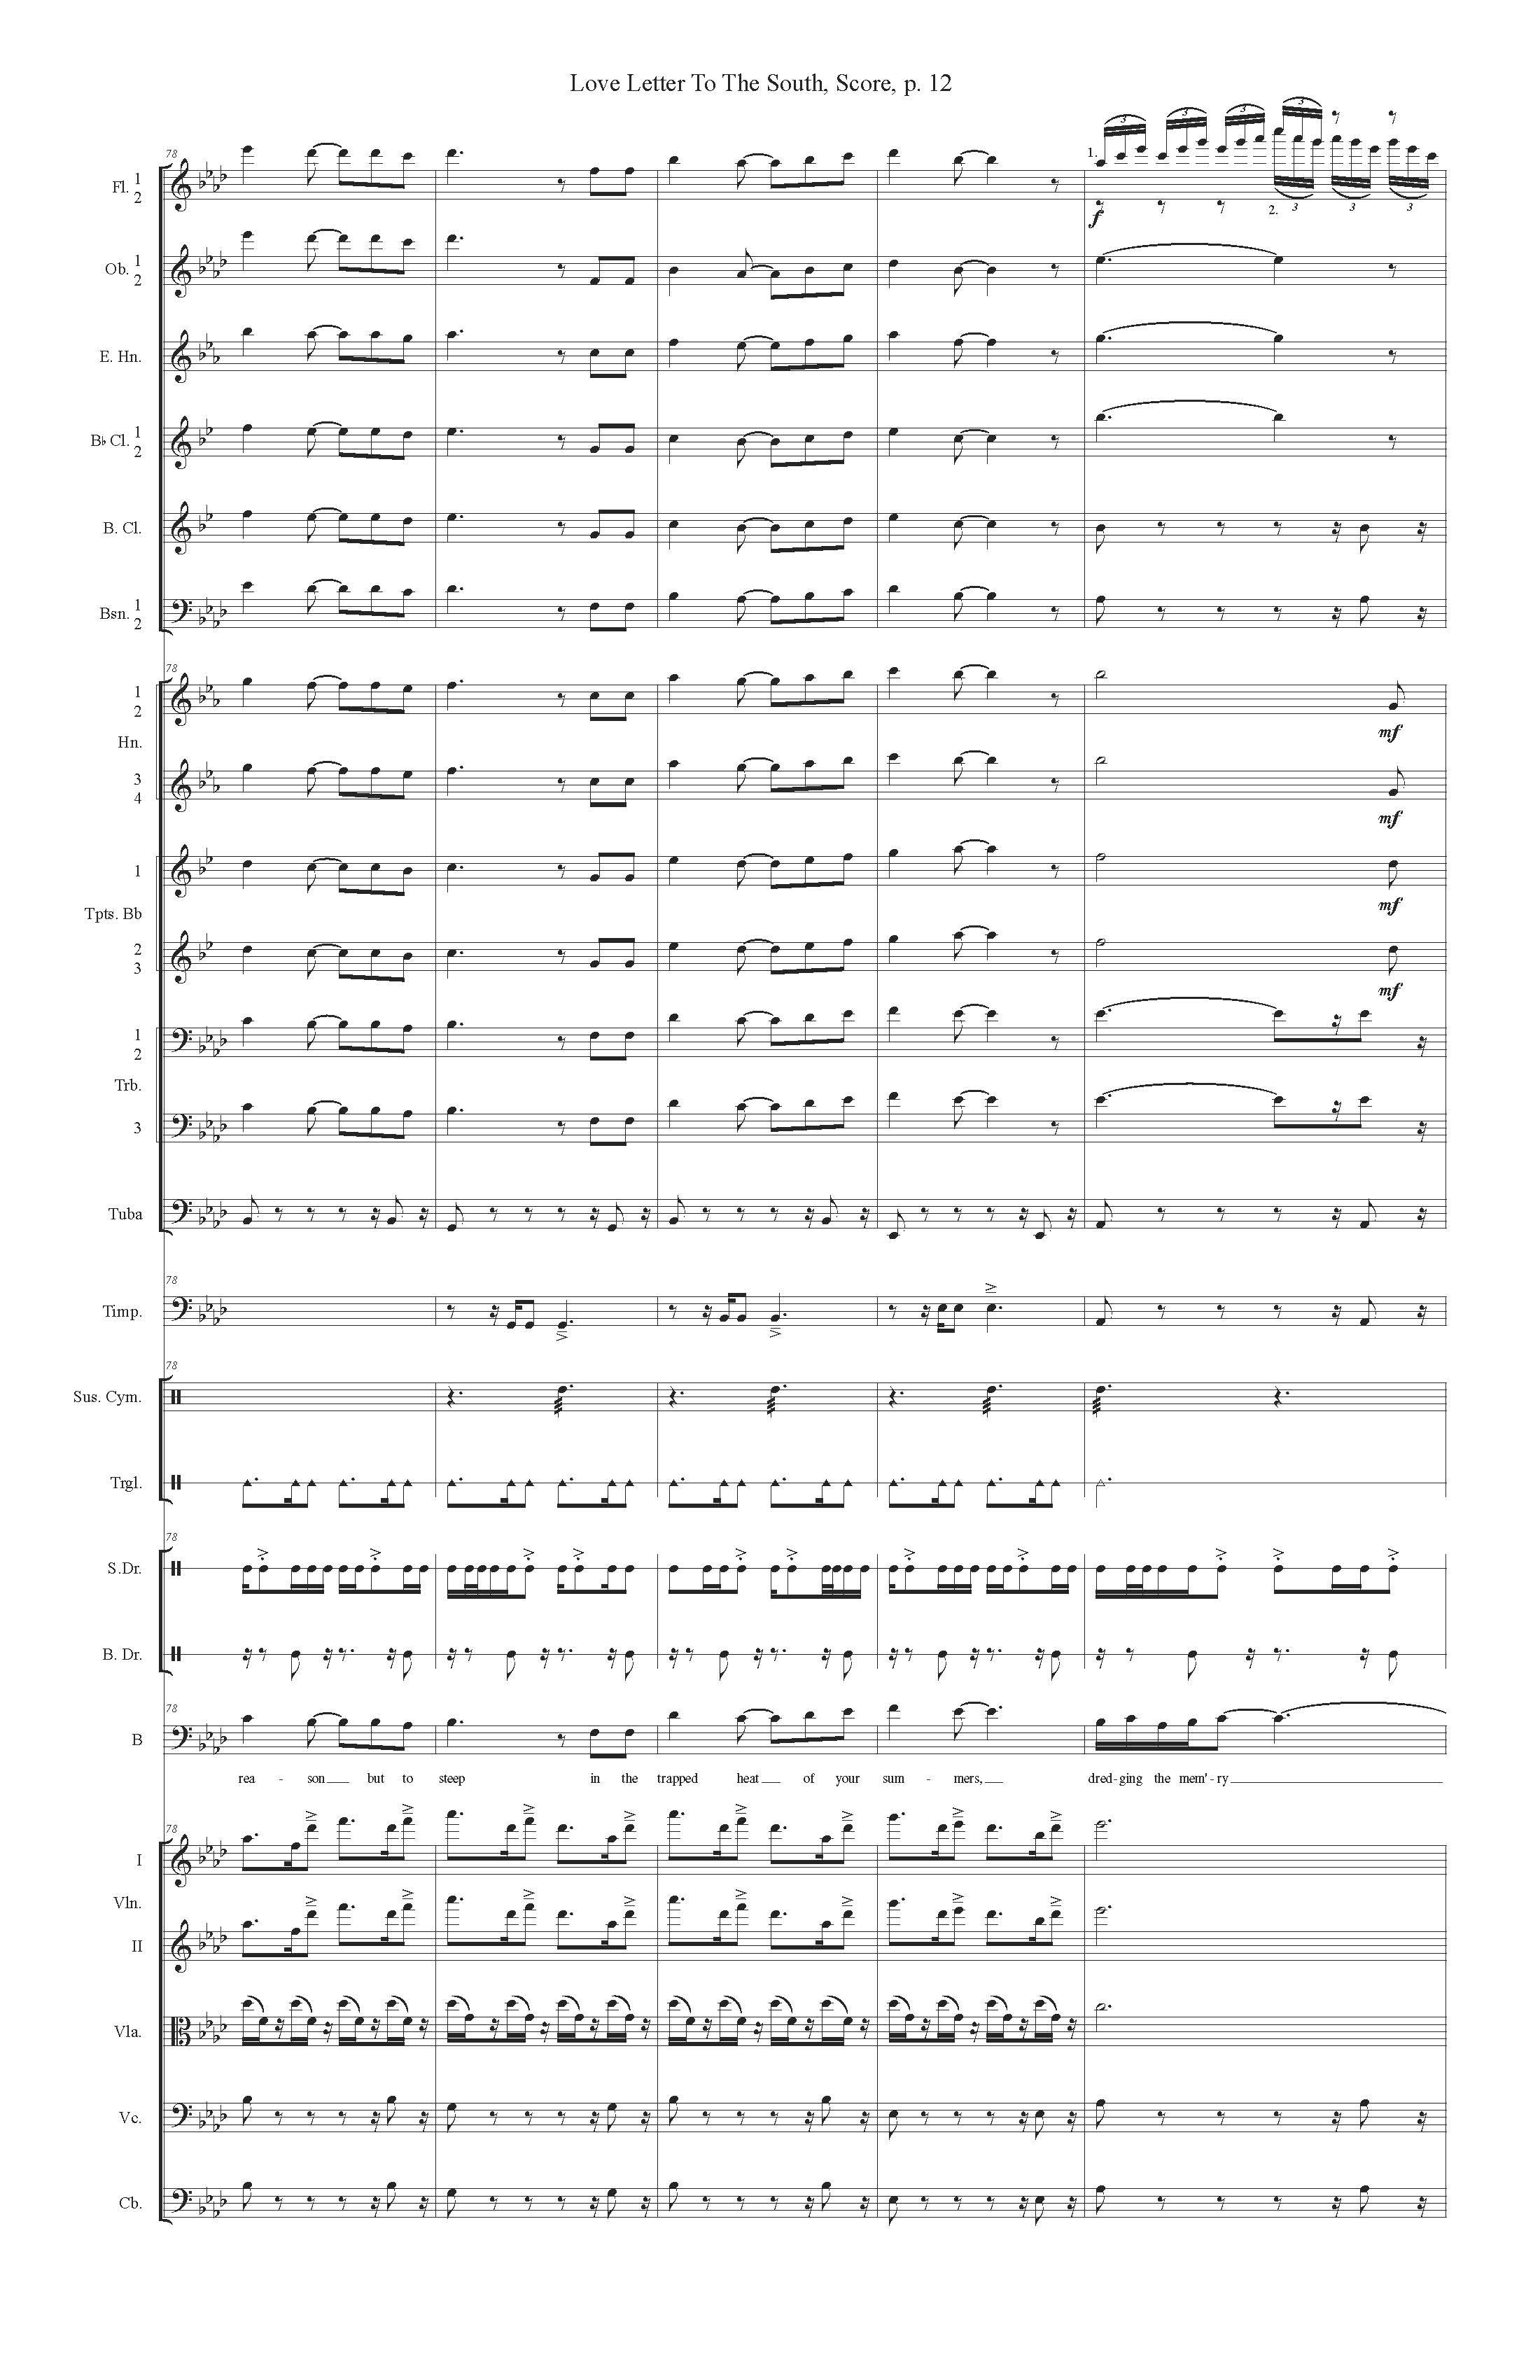 LOVE LETTER TO THE SOUTH ORCH - Score_Page_12.jpg